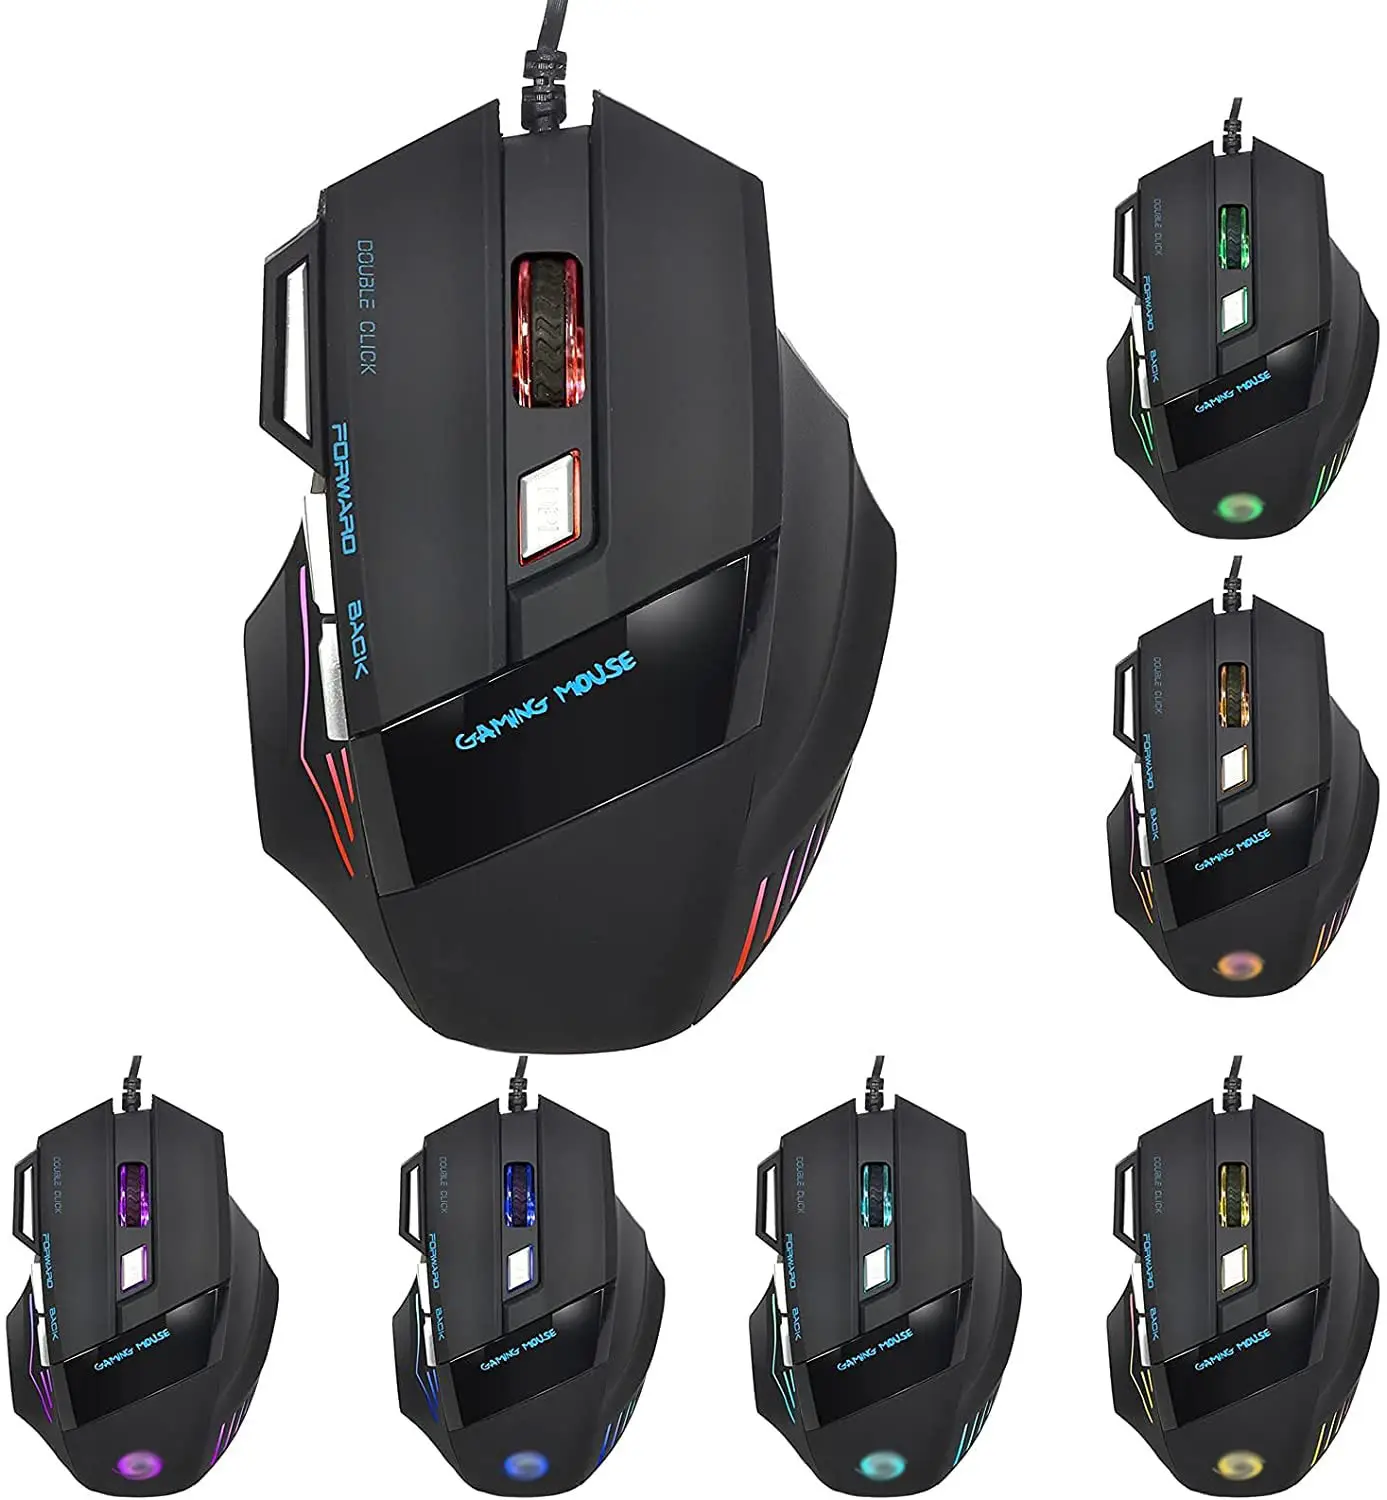 OEM Honeycomb Vertical Mouse Gaming Mice Jogo Do Rato Raton De Juego Raton Inalambrico Gamer Wireless Grip Rgb Gaming Mouse Game